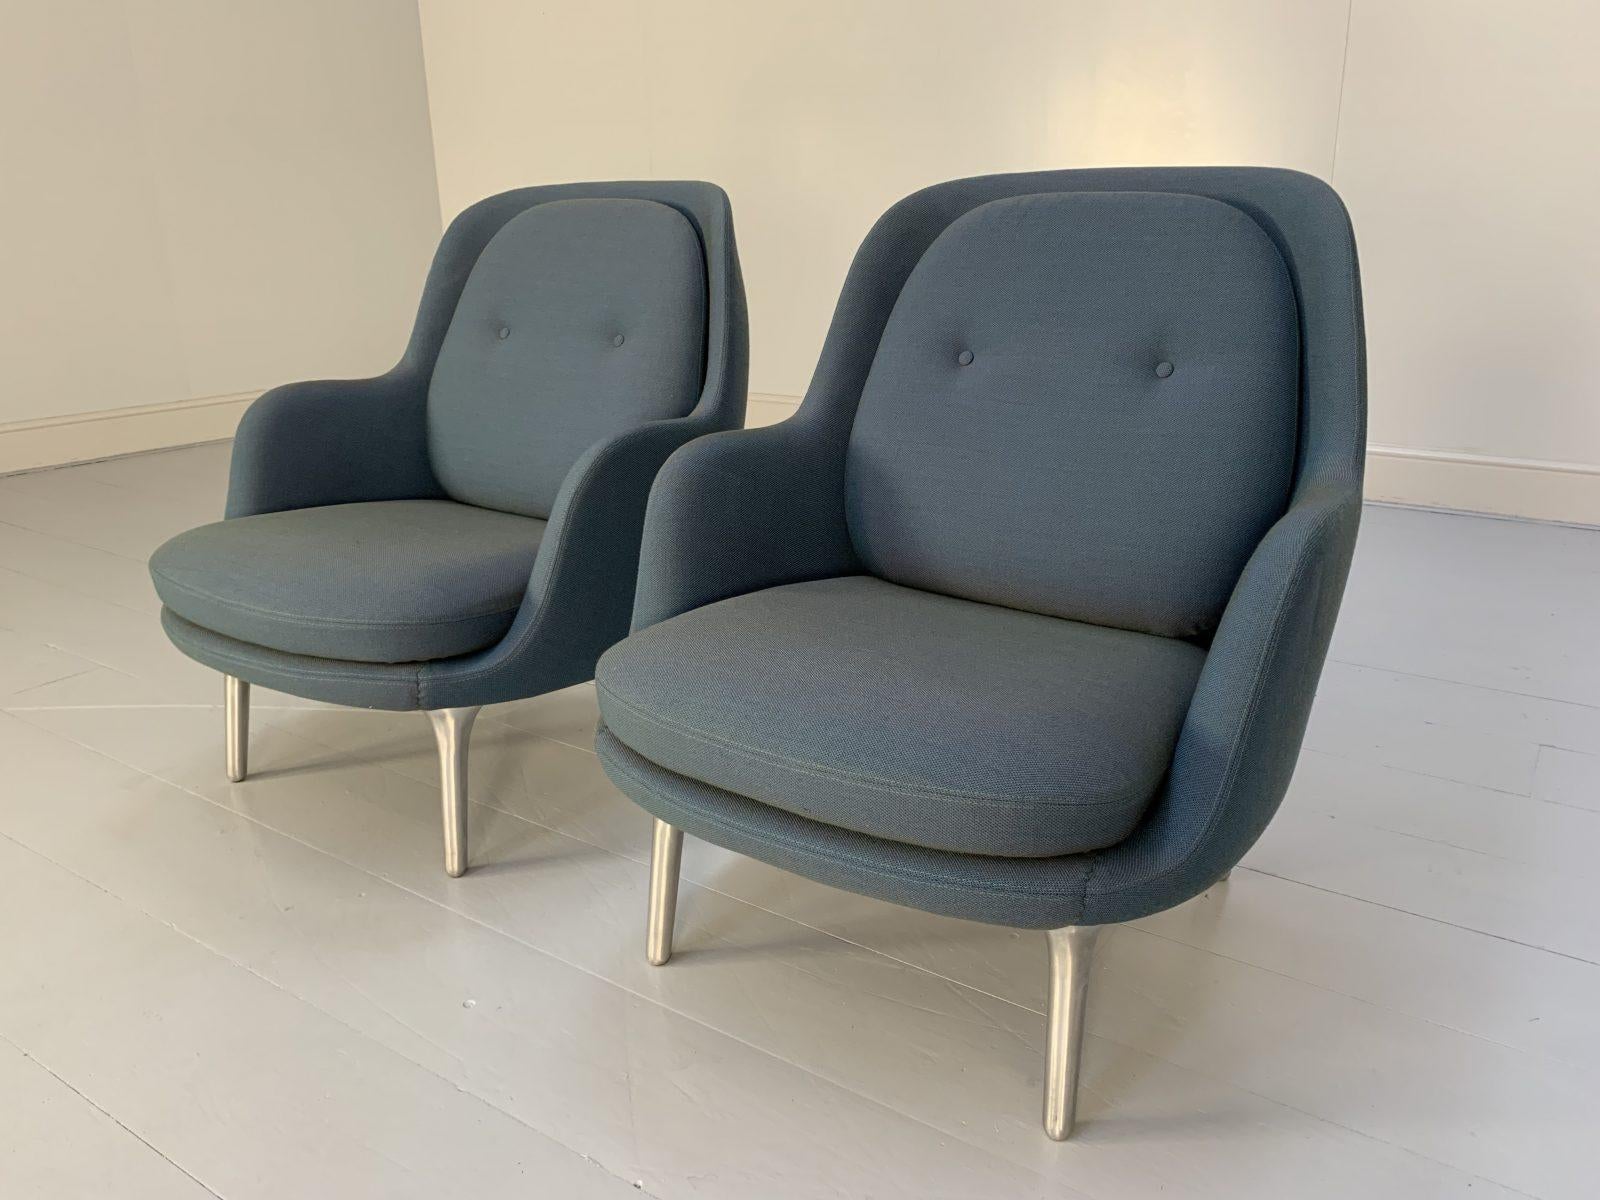 This is a rare pair of the iconic “Fri”Armchairs, from the world renown Danish furniture house of Fritz Hansen.

In a world of temporary pleasures, Fritz Hansen create beautiful furniture that remains a joy forever.

Dressed in its most